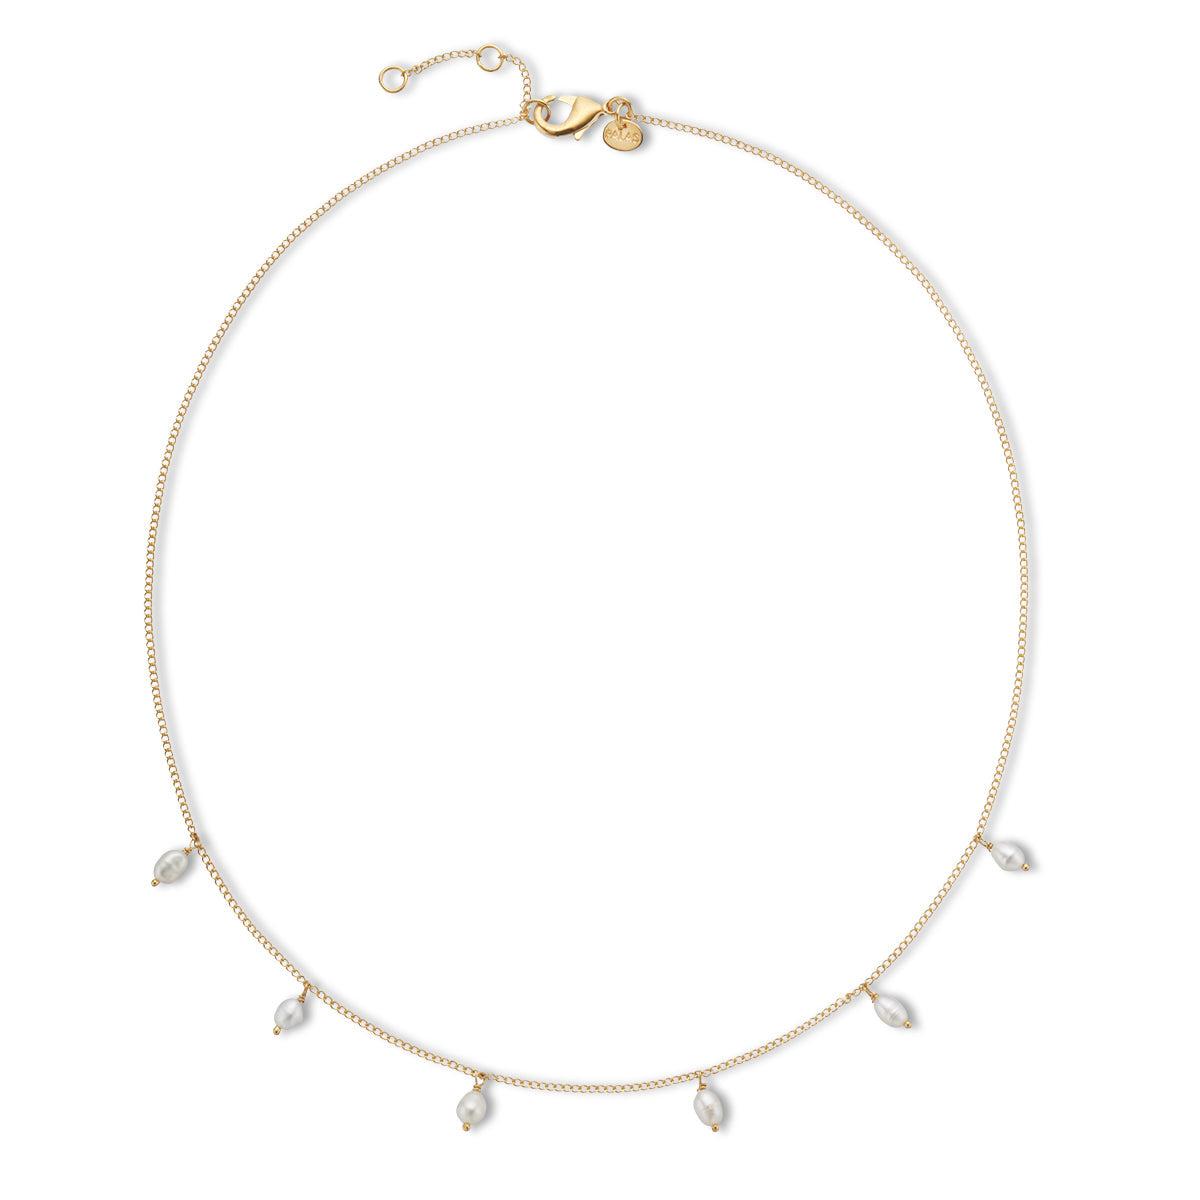 Positano Pearl & Chain Necklace-Jewellery-Palas-The Bay Room